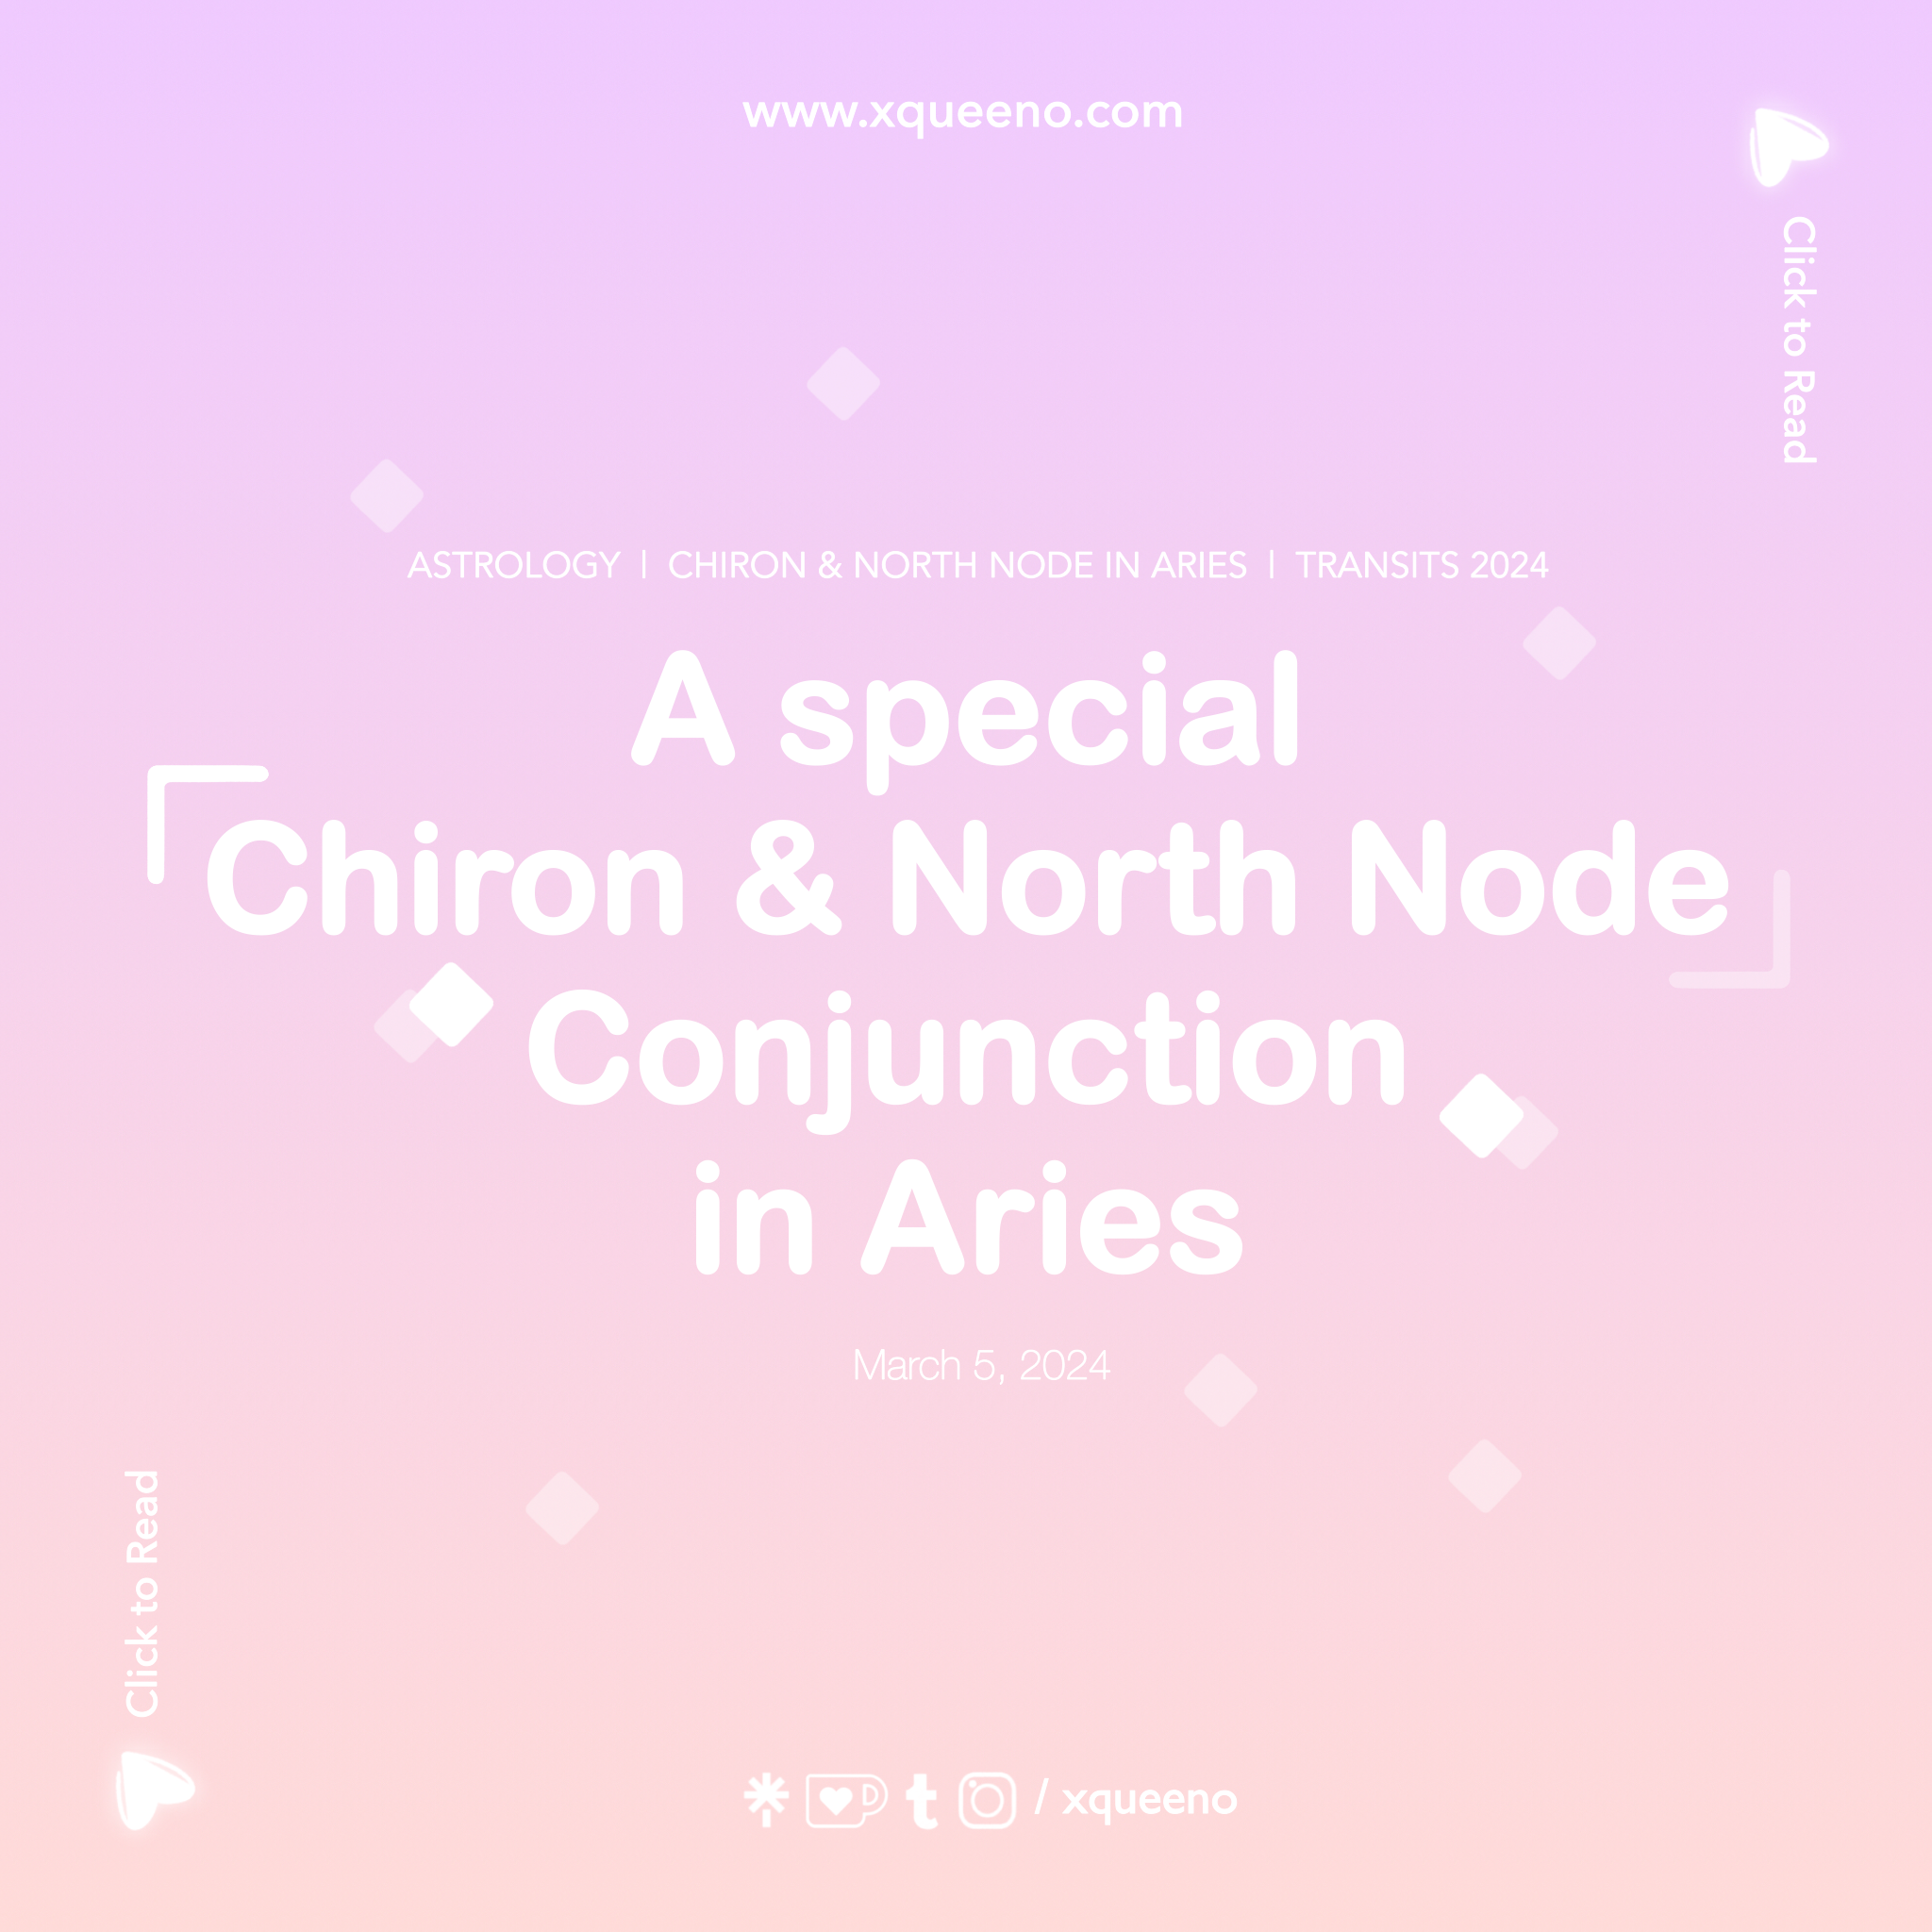 A Special Chiron & North Node Conjunction in Aries | March 5, 2024 Transit Astrology